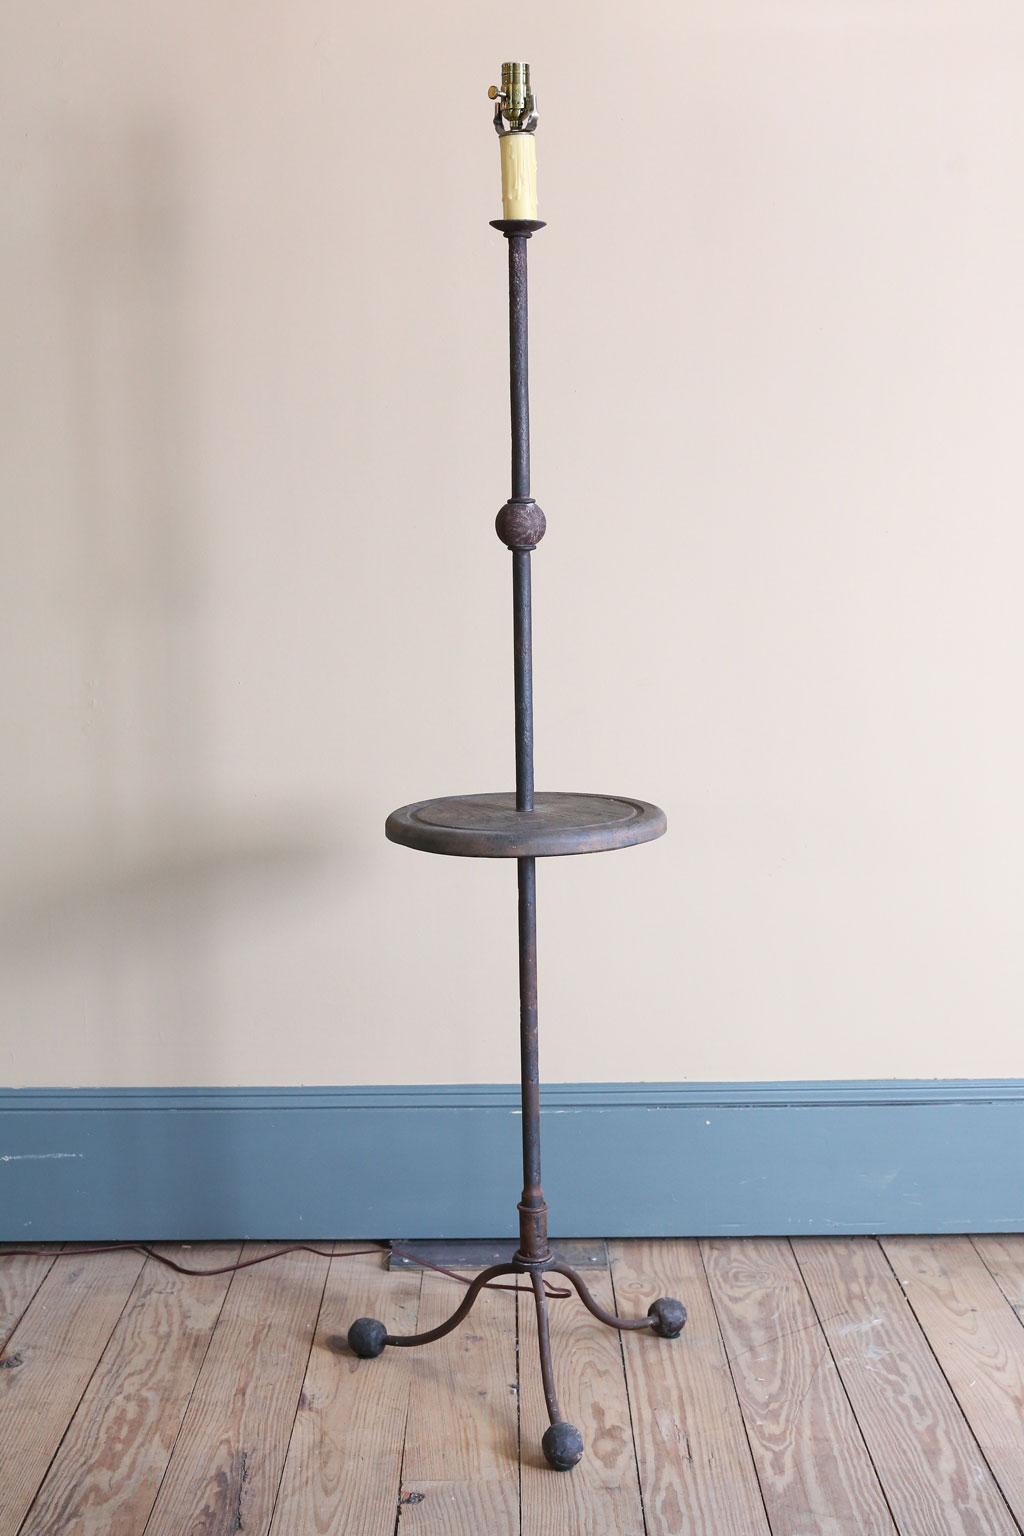 We make this lamp for our shop. It is nice for spaces where there is not room for a table and a light is needed.

It is forged iron and carved wood and hand-fished. The lamp is wired here in Houston. The height measurement is to the top of the